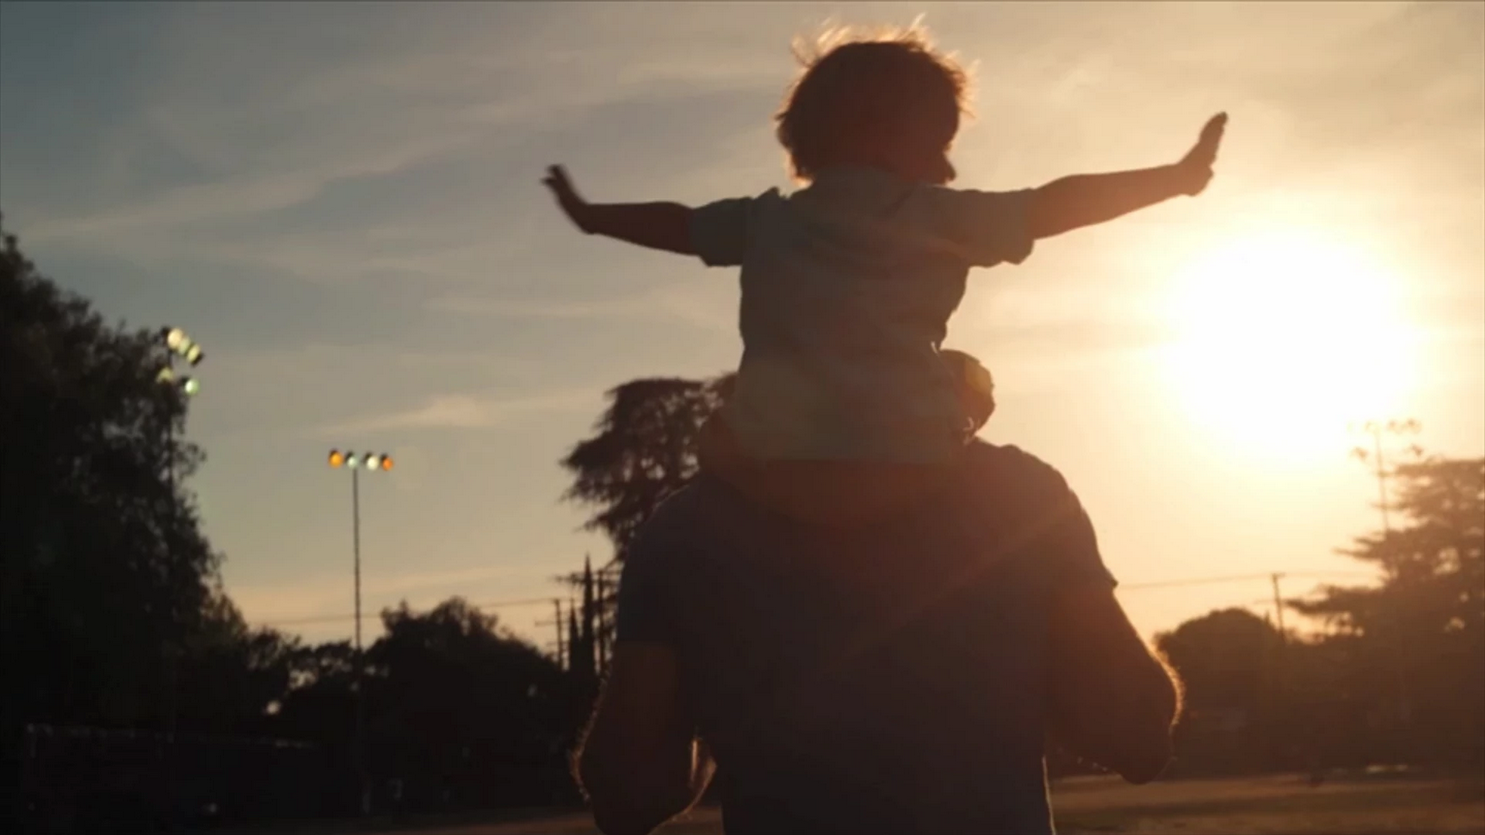 Dove's 2015 Super Bowl Commercial celebrated fatherhood and masculinity in a unique and poignant way.